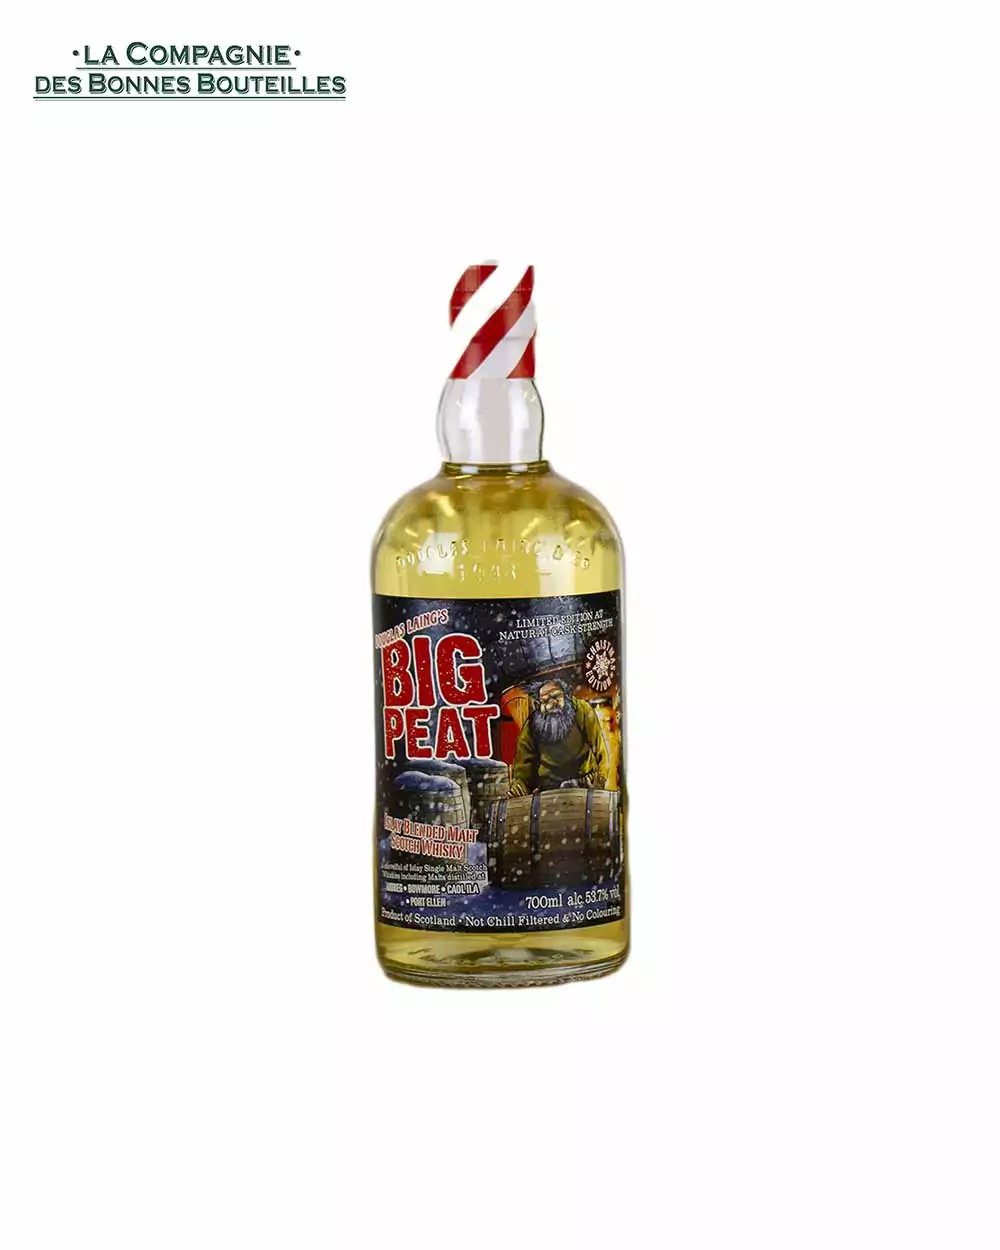 Blended Whisky Big Peat Edition Christmas